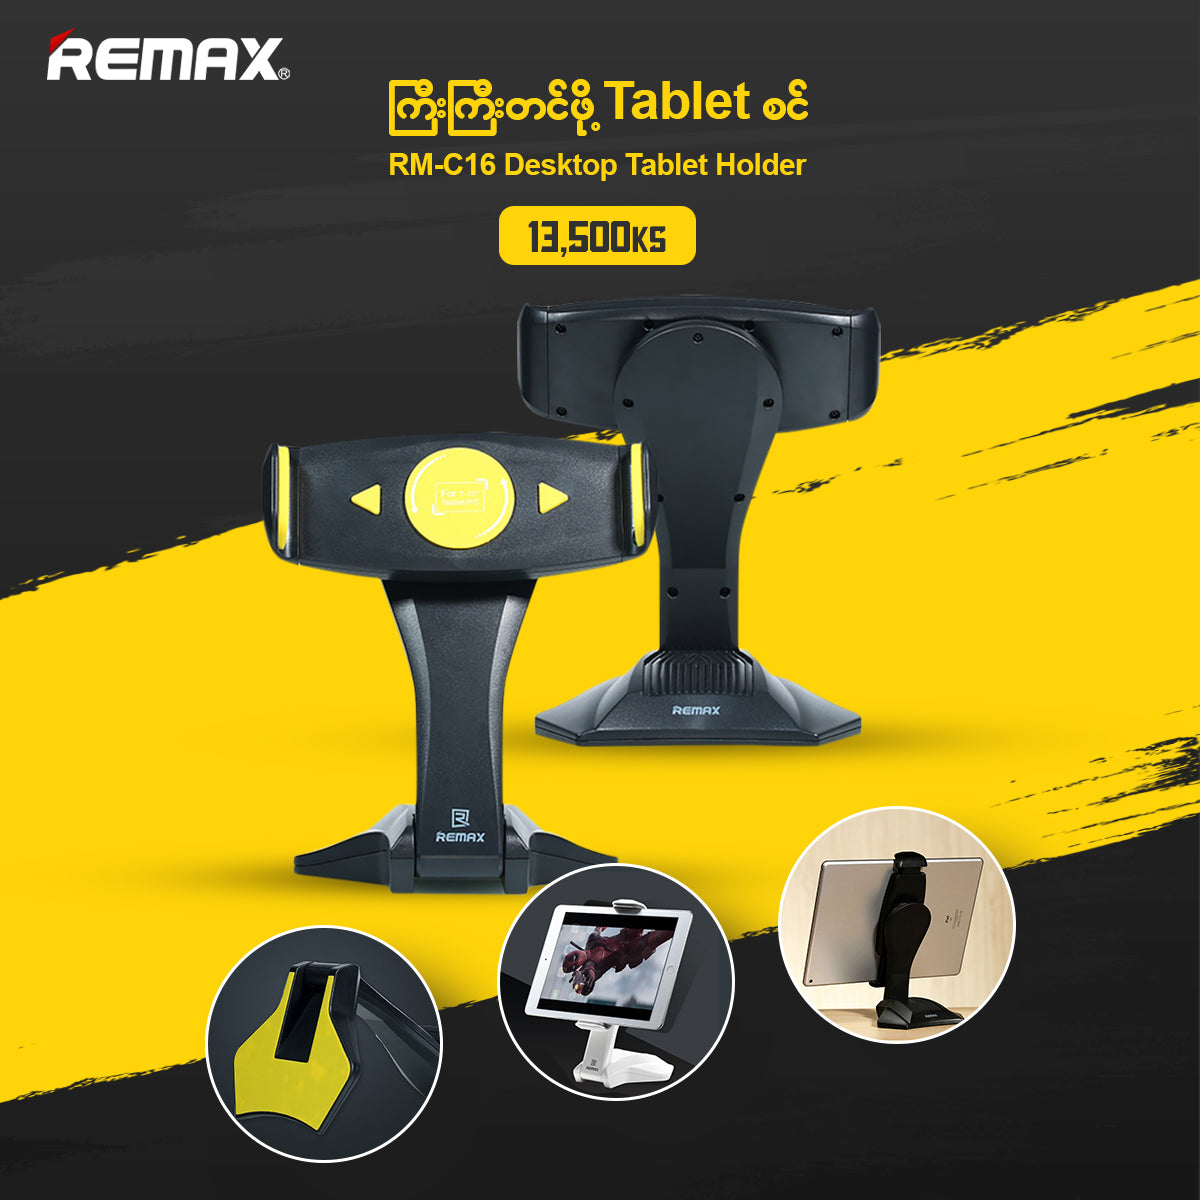 REMAX RM-C16 Tablet Holder ,Mobile Phone Stand Holder, Lazy,phone holder stand,Adjustable Phone Holder ,Tablet Universal Mobile Phone Holder ,360 Degree Long Arm, TikTok Stand Live Stand Holder for iphone 11.iphone 12, xiaomi